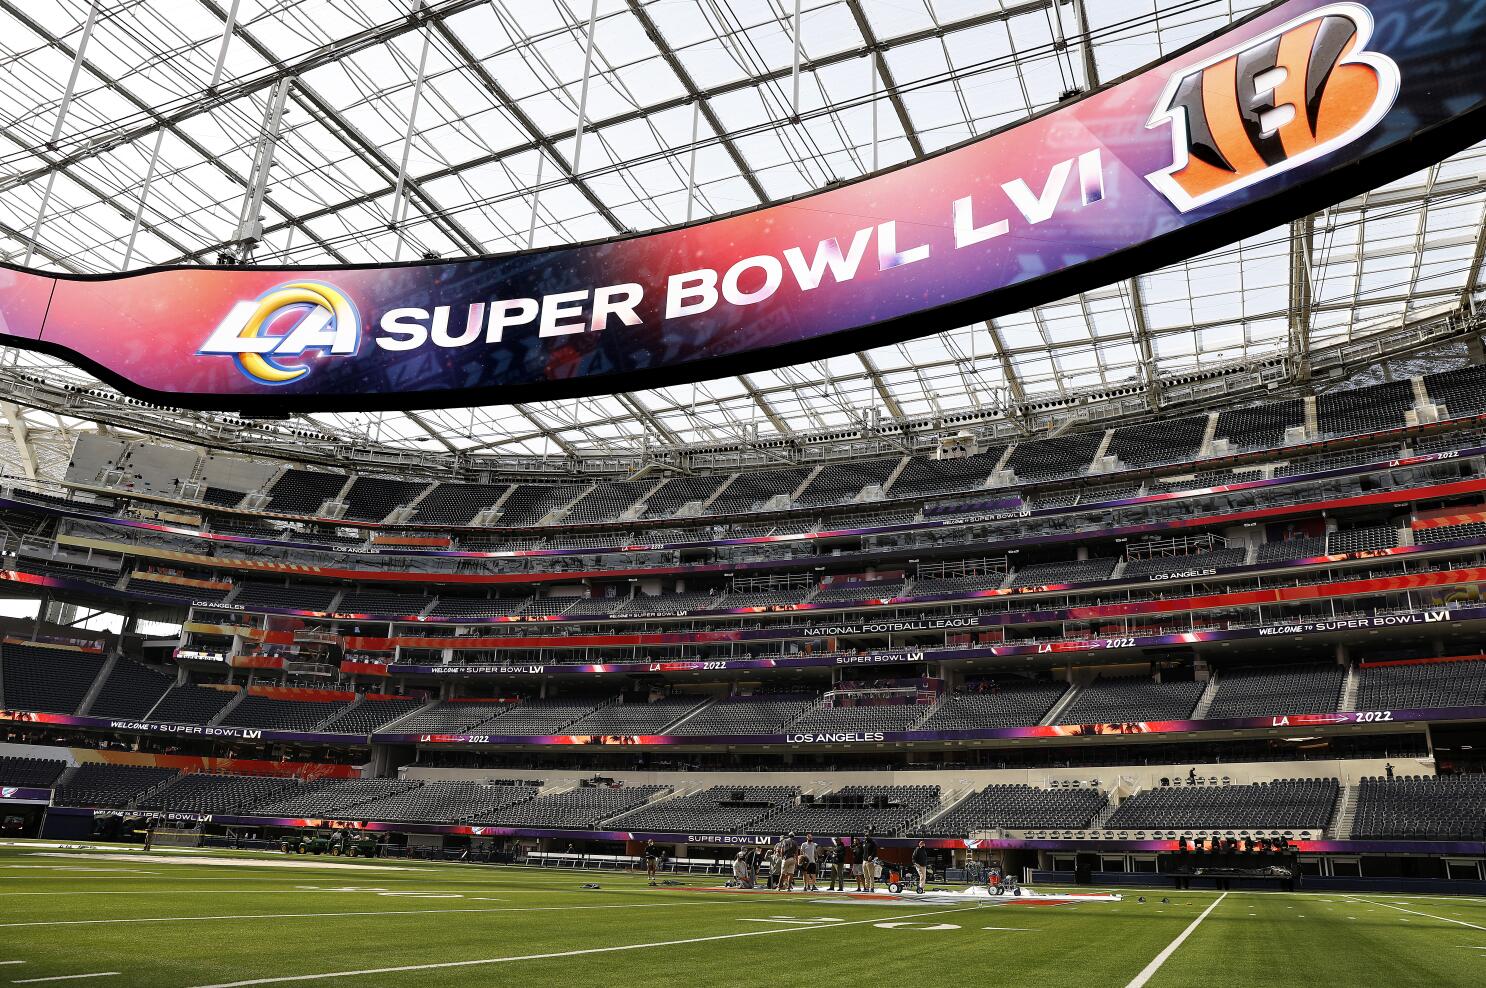 Super Bowl 2022 kickoff countdown: What time does game start